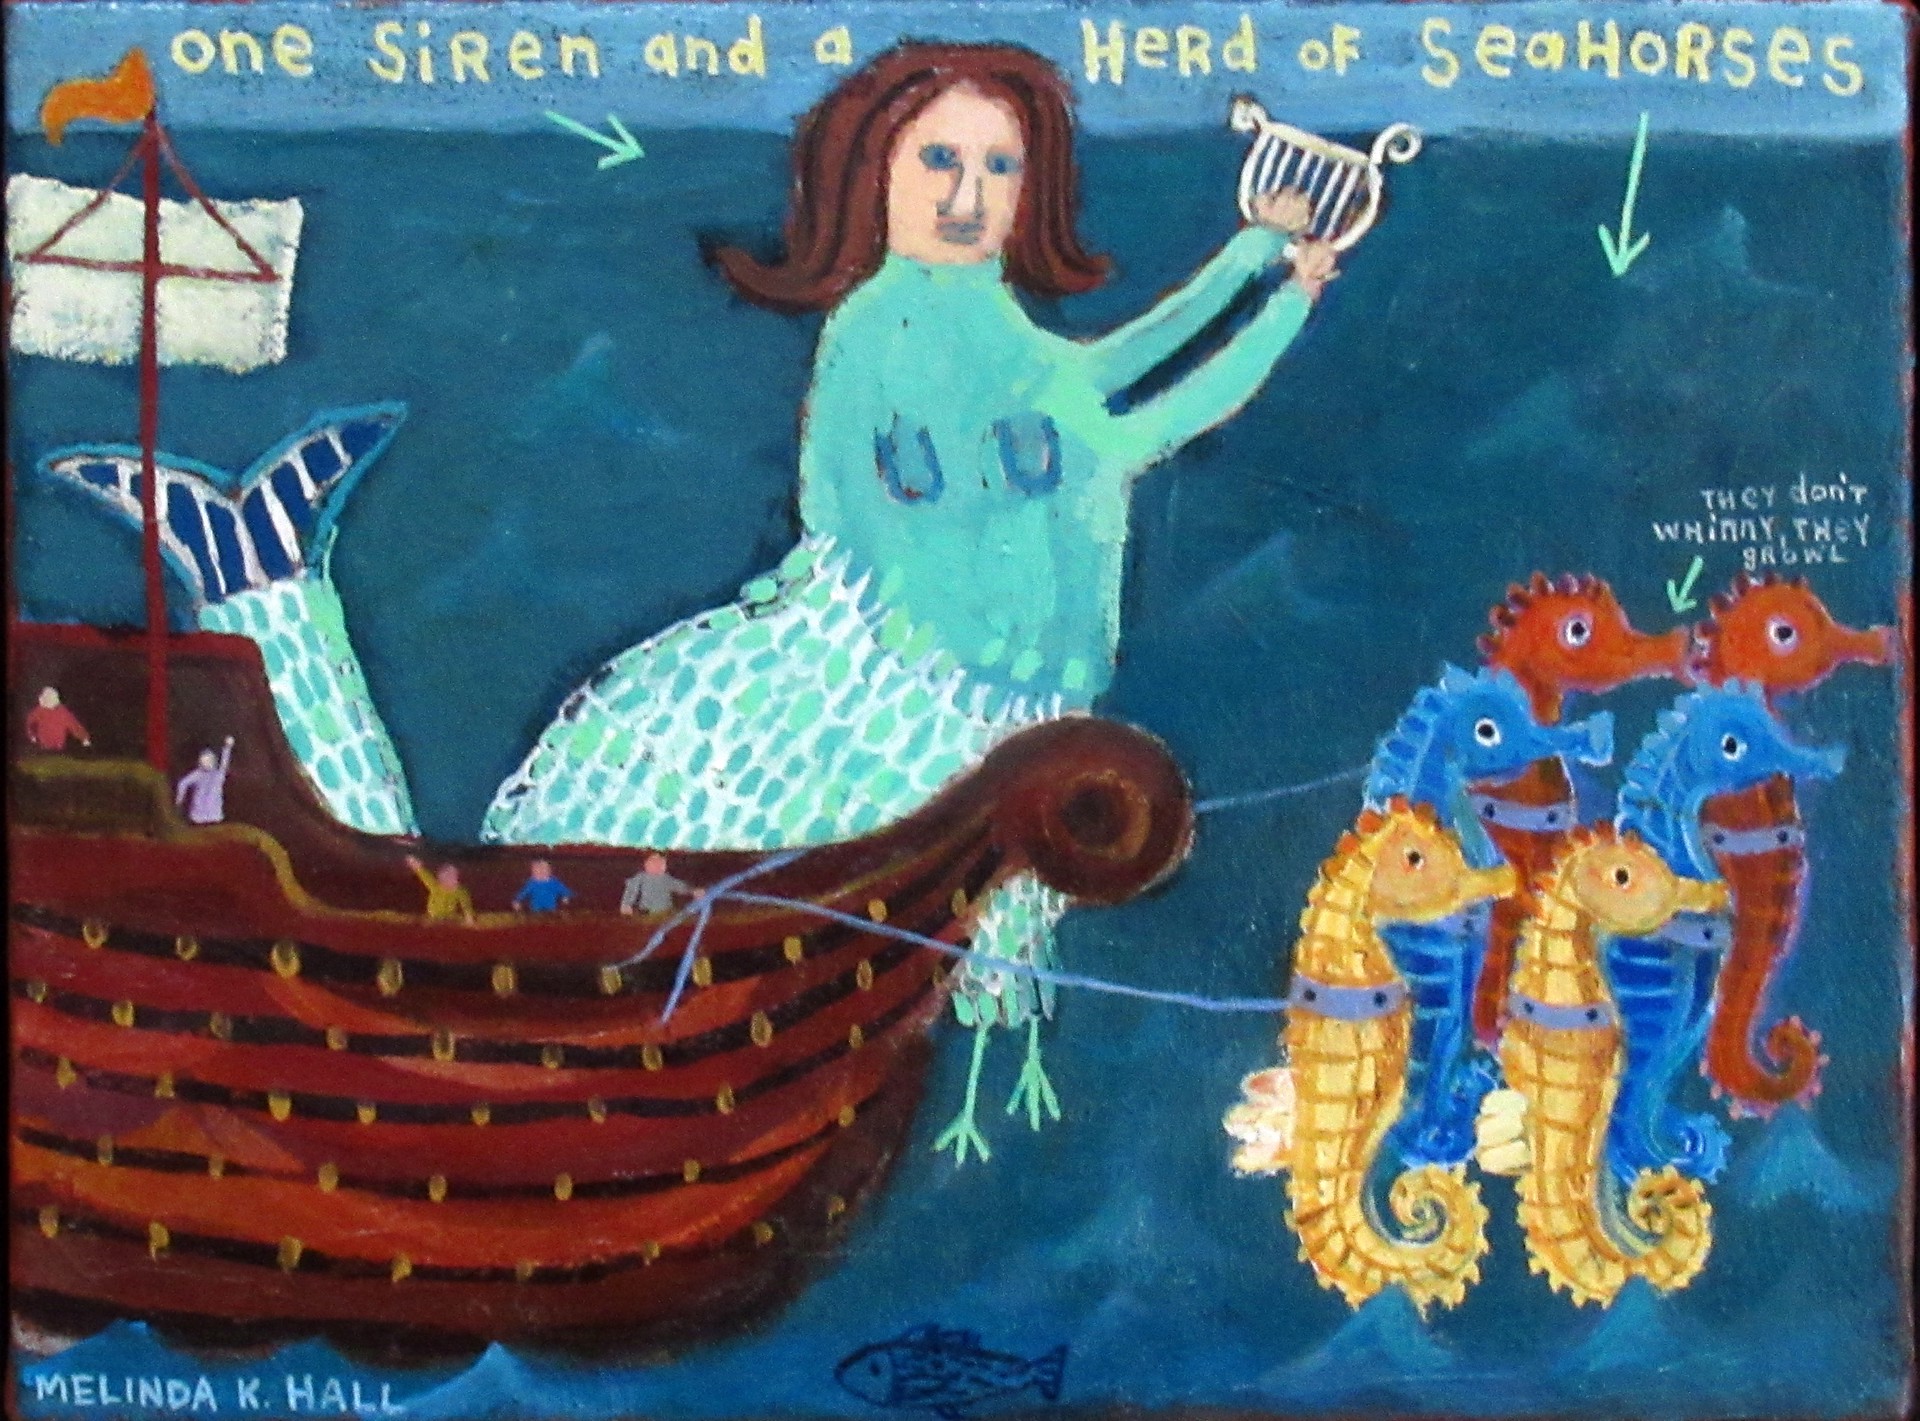 One Siren and a Herd of Seahorses by Melinda K. Hall